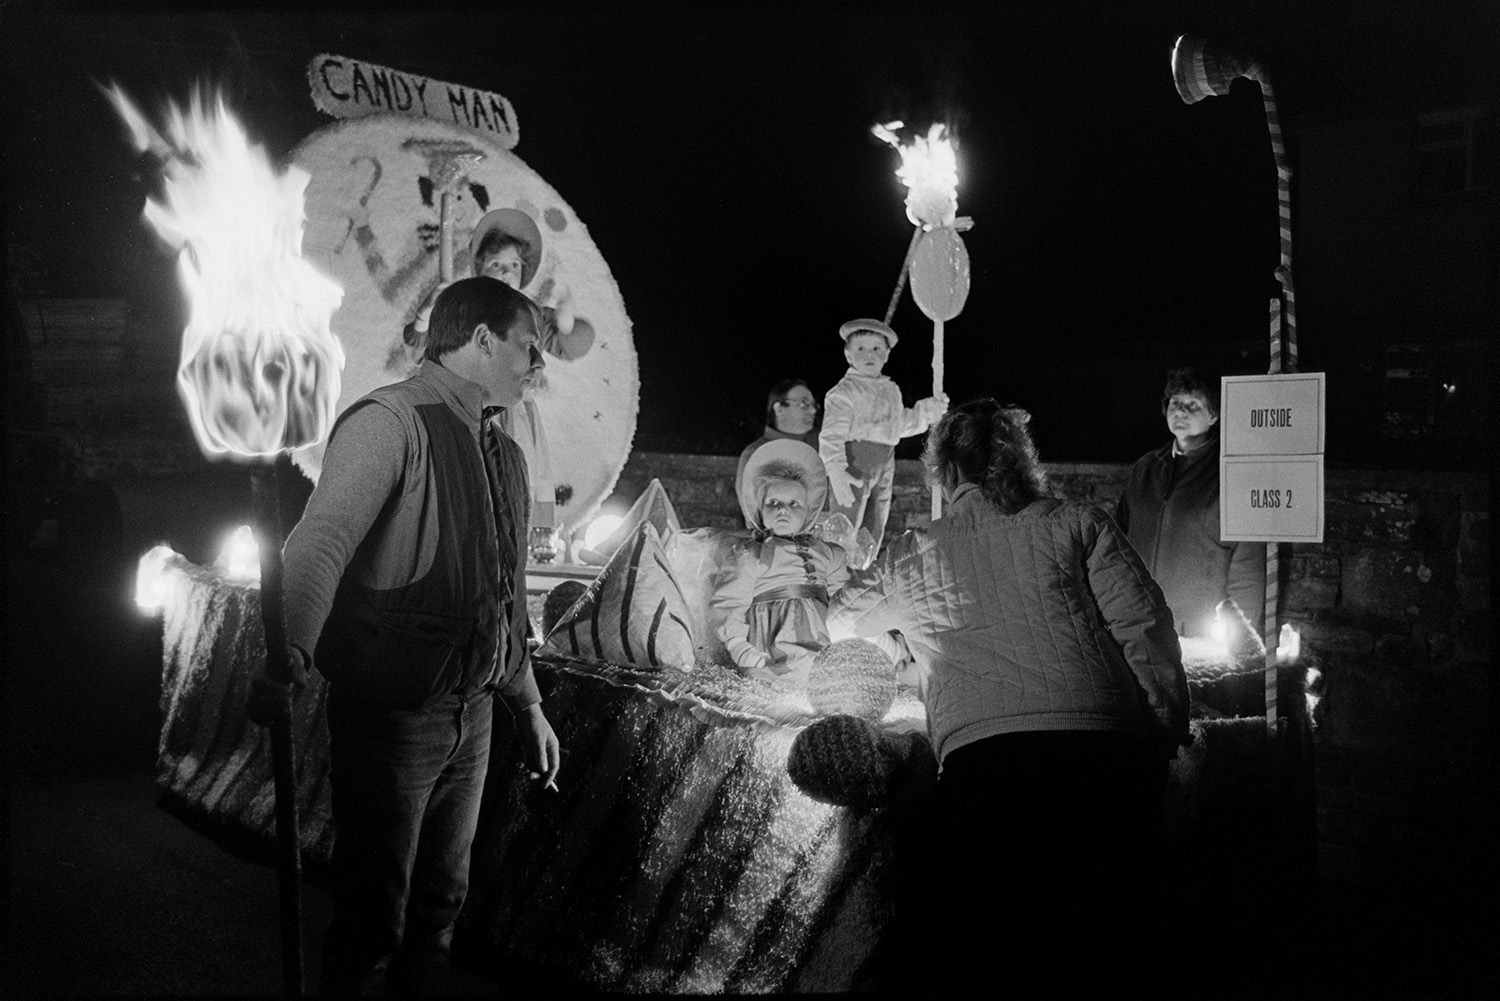 Carnival floats at night, queen and attendants, fancy dress with burning torches.
[A carnival float during the evening procession at Dolton Carnival. Two girls and boy are in fancy dress and on a float called 'Candy Man'. Men and women are standing around the float, with lights and burning torches.]